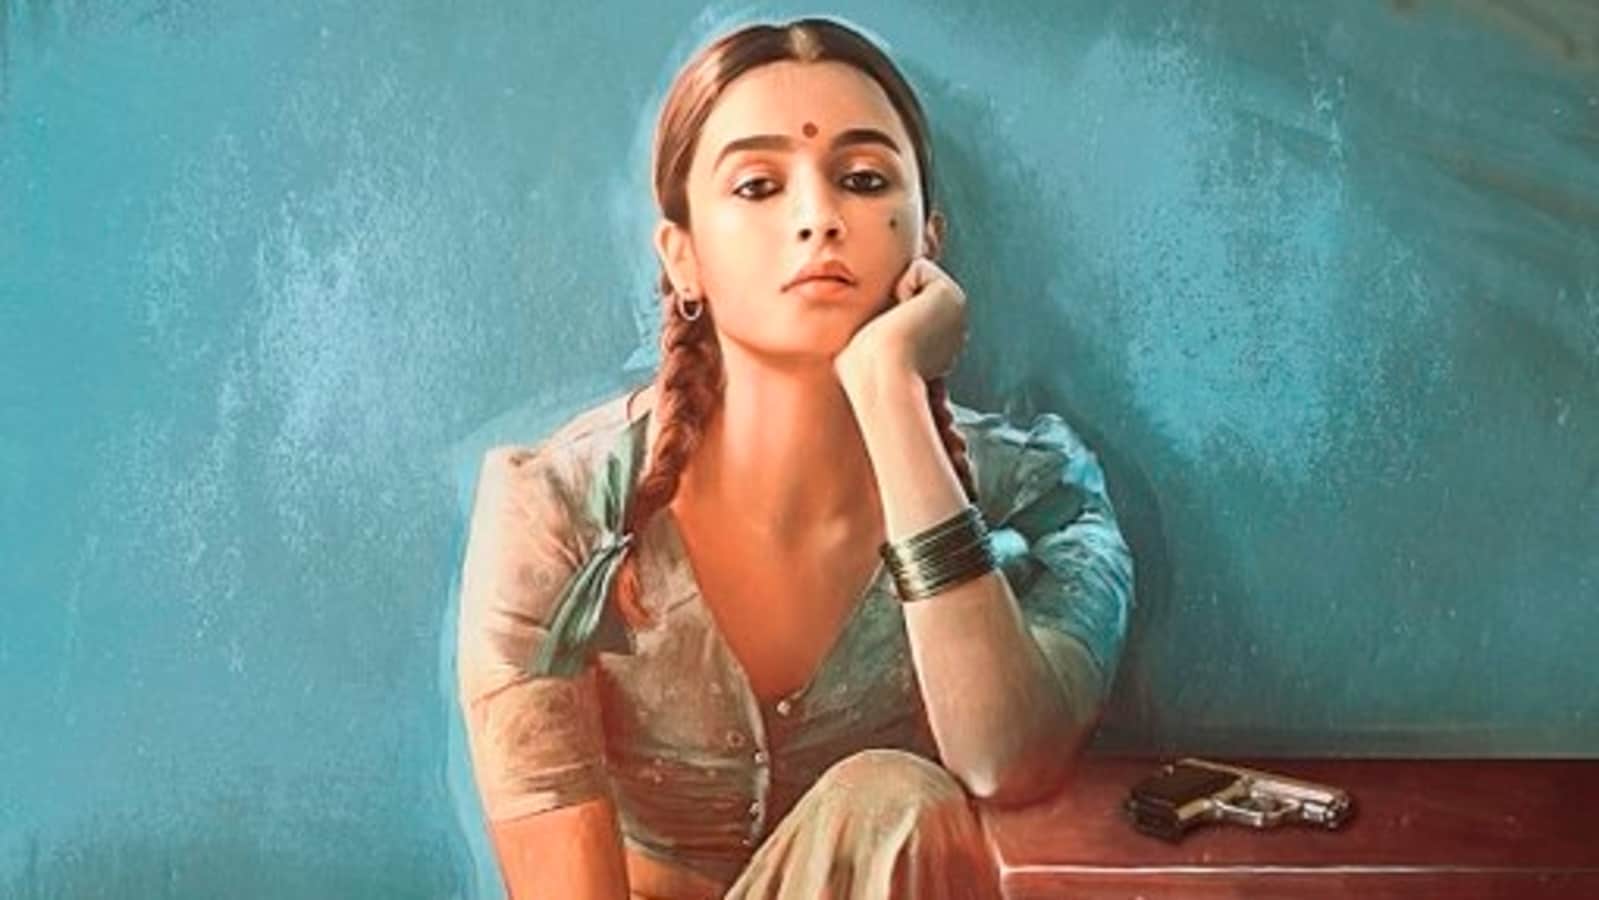 Gangubai Kathiawadi box office collection day 3: Alia Bhatt film collects over ₹38.5 crore on first weekend